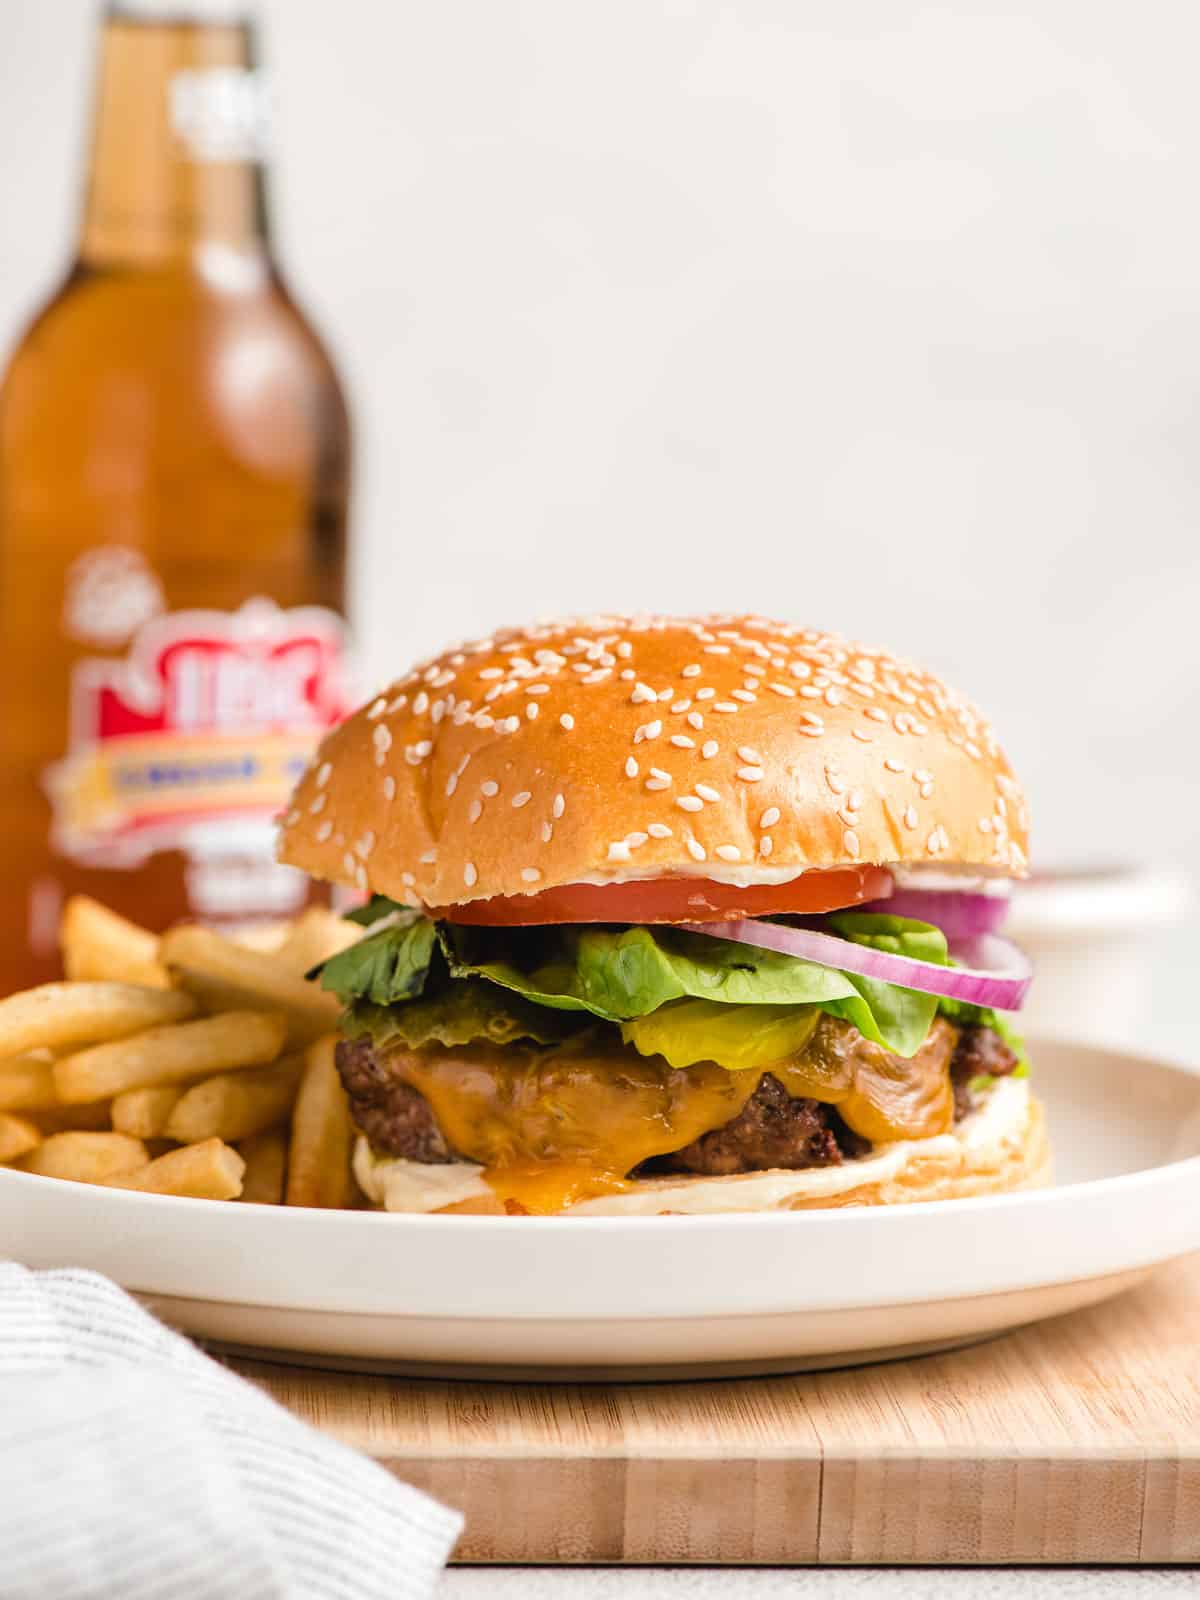 A classic burger and fries combo meal featuring an air fryer hamburger and a soda.